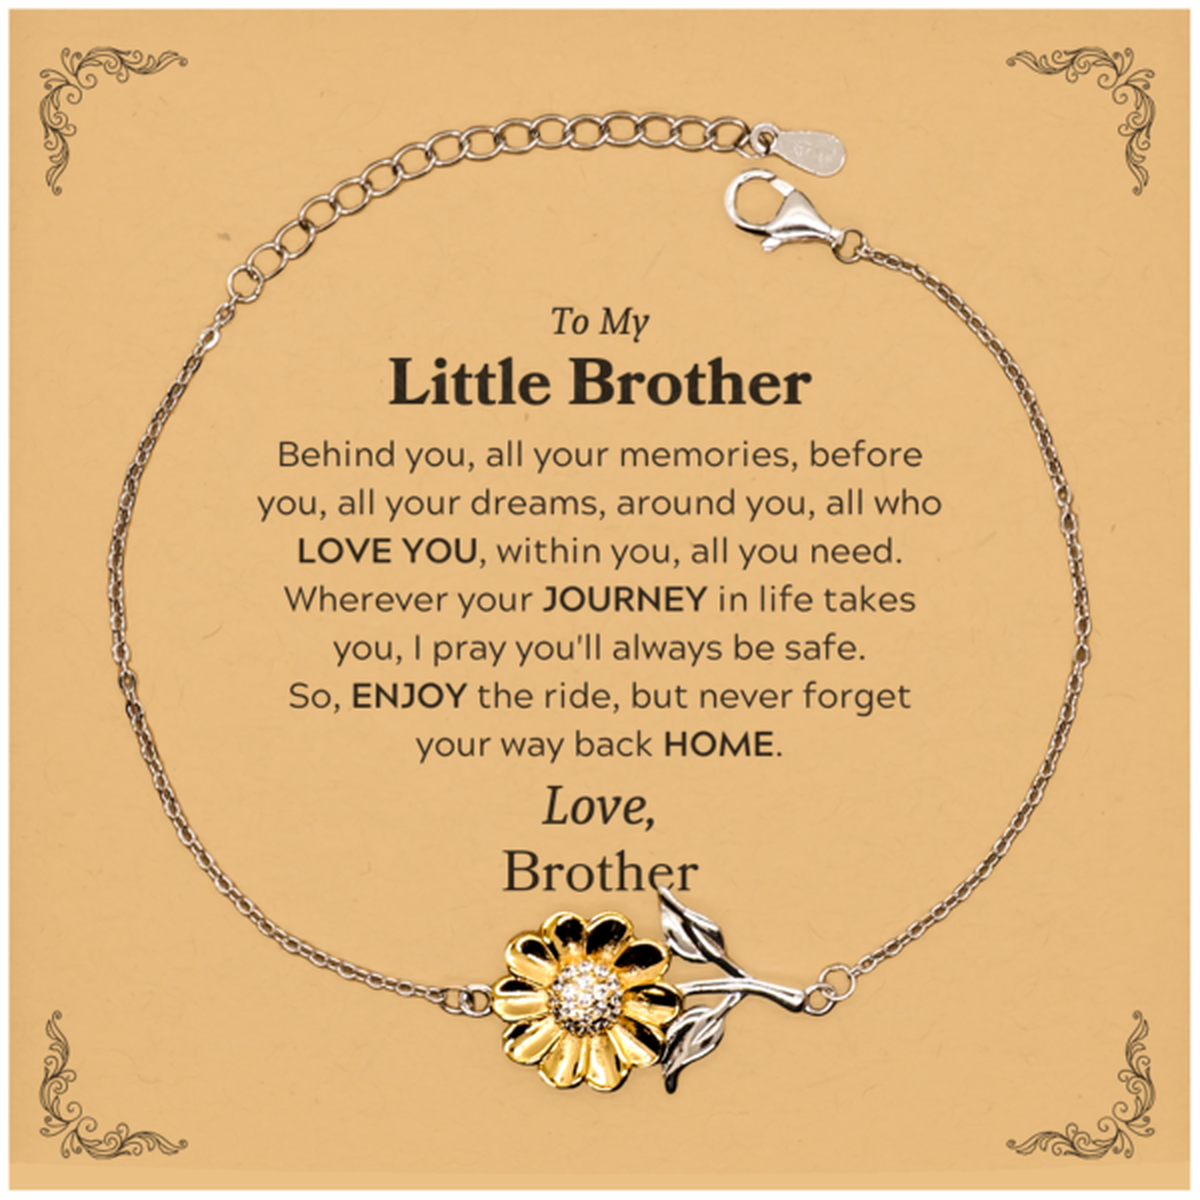 To My Little Brother Graduation Gifts from Brother, Little Brother Sunflower Bracelet Christmas Birthday Gifts for Little Brother Behind you, all your memories, before you, all your dreams. Love, Brother